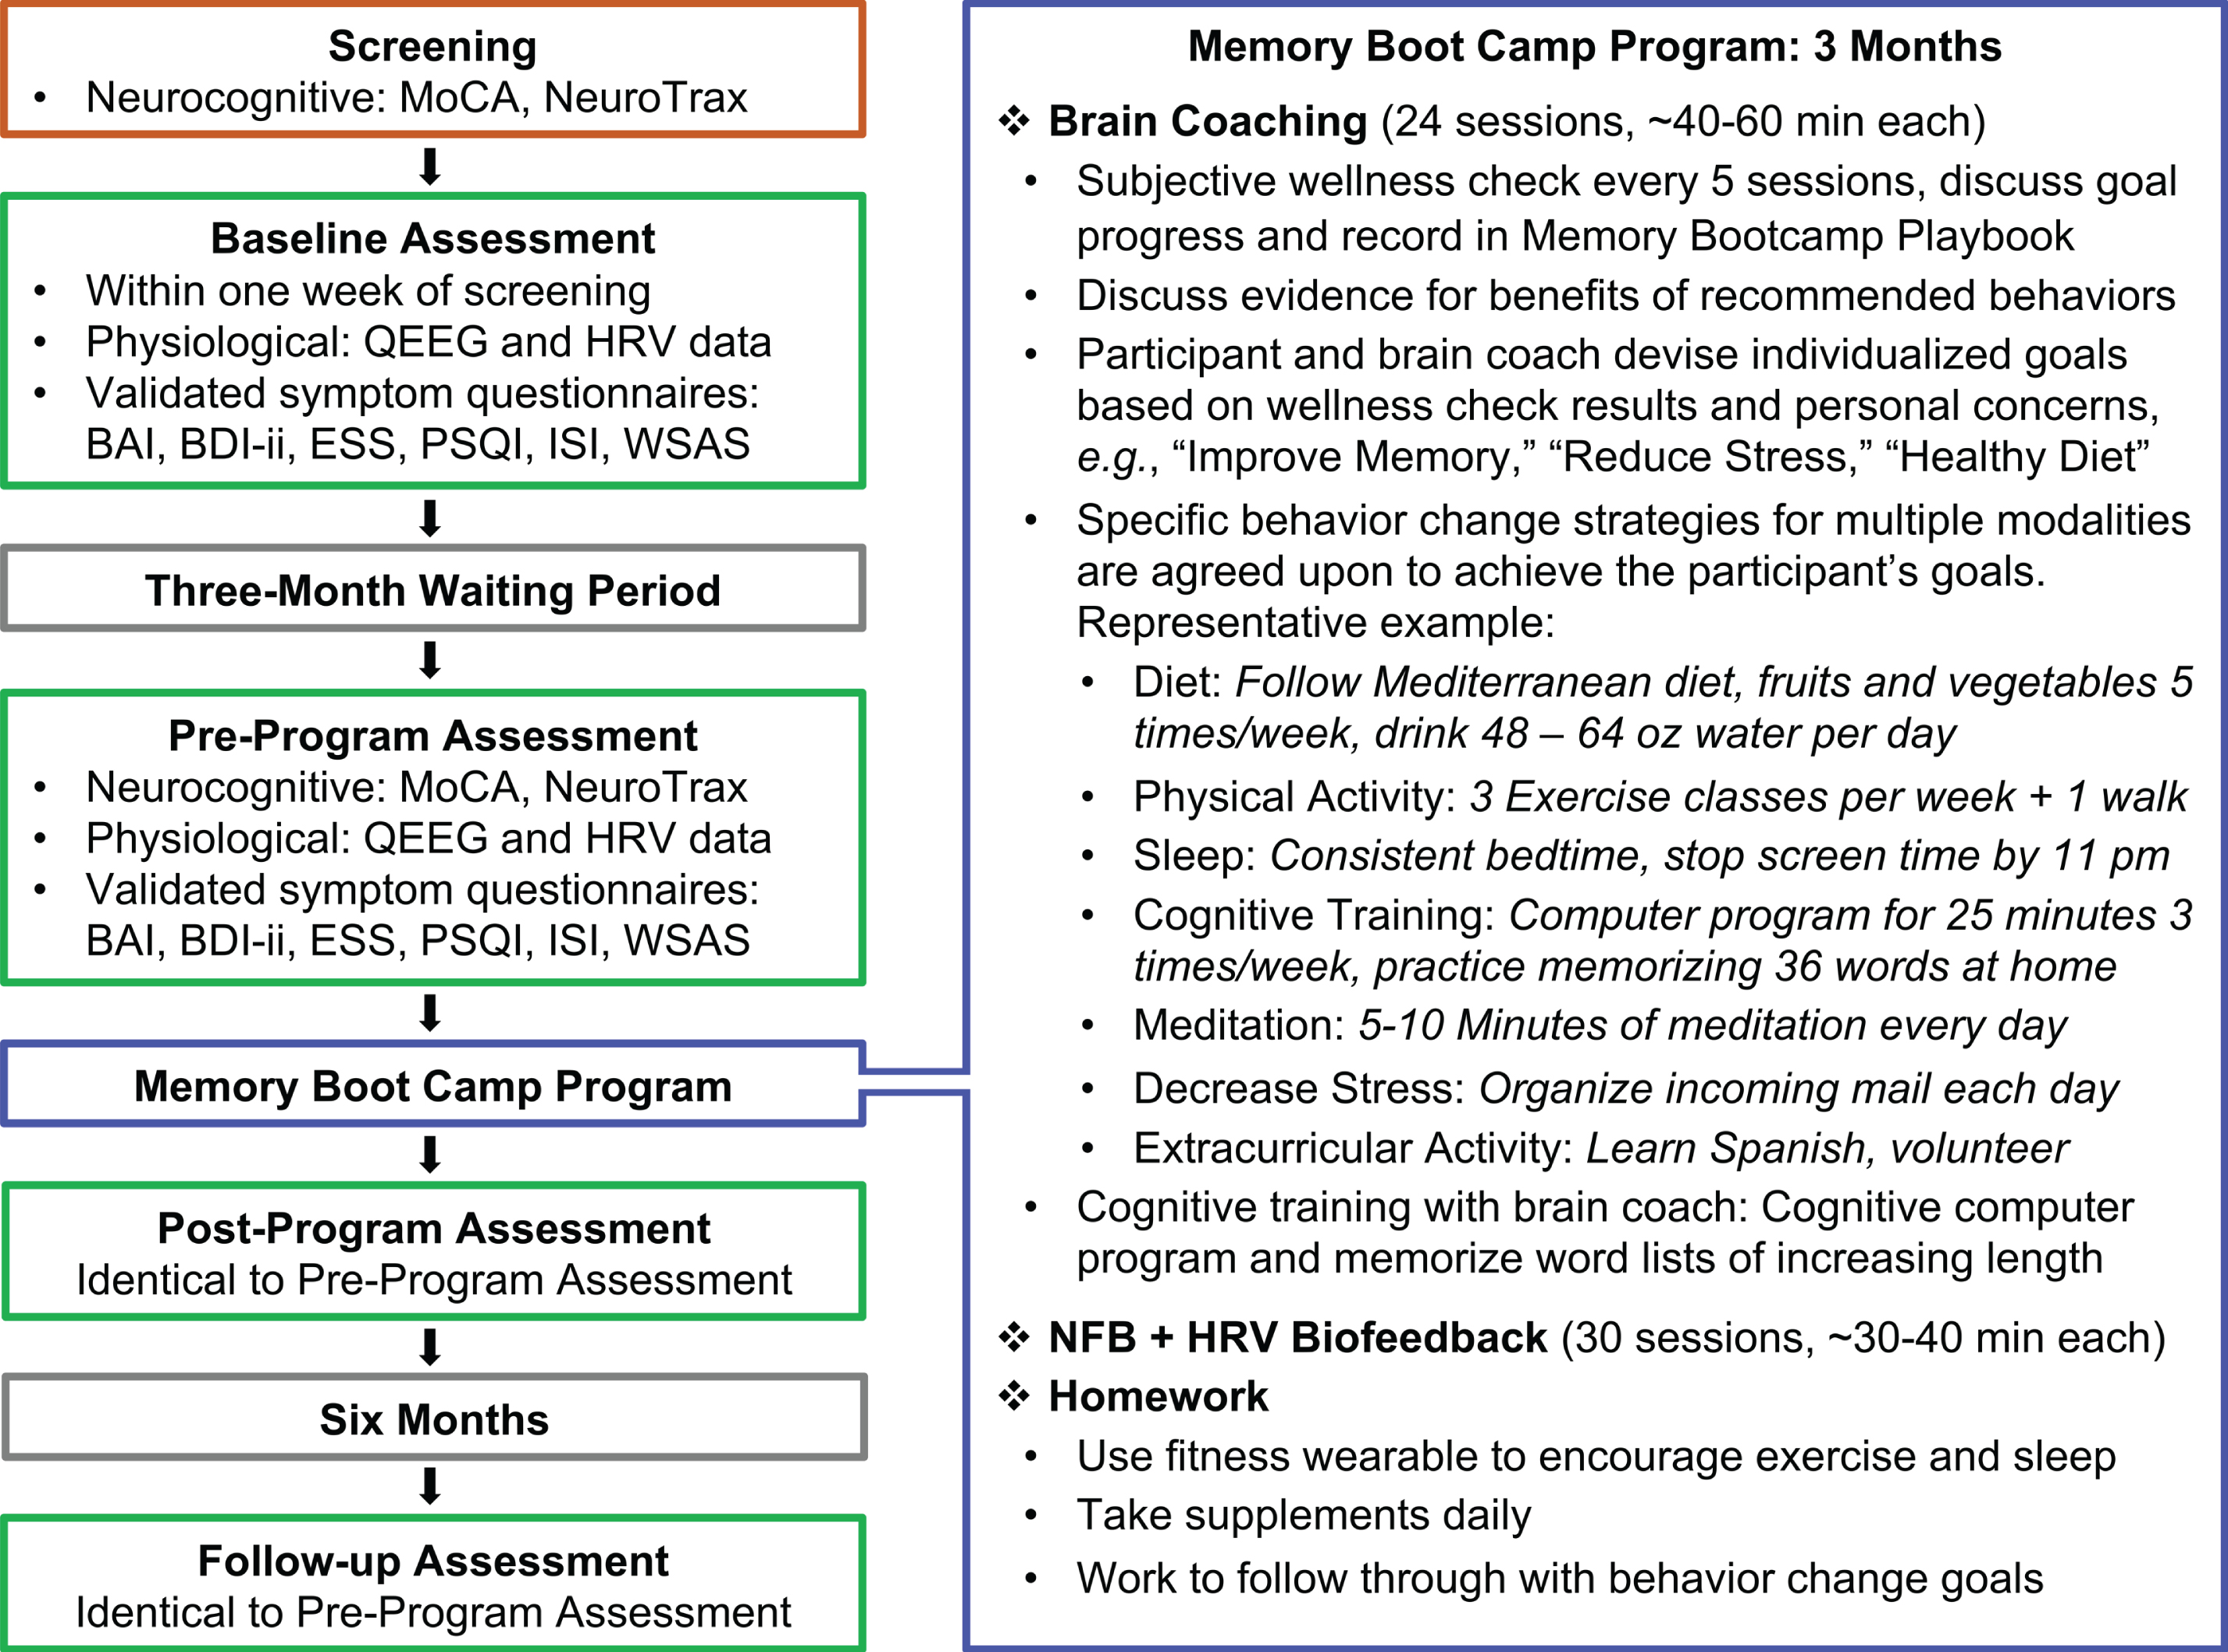 Summary of the Study and the Memory Boot Camp Program. A summary of each phase of the study is displayed on the left. The right panel is a summarized description of the intervention phase of this trial: The Memory Boot Camp program. MoCA: Montreal Cognitive Assessment; BAI: Beck Anxiety Inventory; BDI-ii: Beck Depression Inventory-II; ESS: Epworth Sleepiness Scale; ISI: Insomnia Severity Index; PSQI: Pittsburgh Sleep Quality Index; WSAS: Work and Social Adjustment Scale.